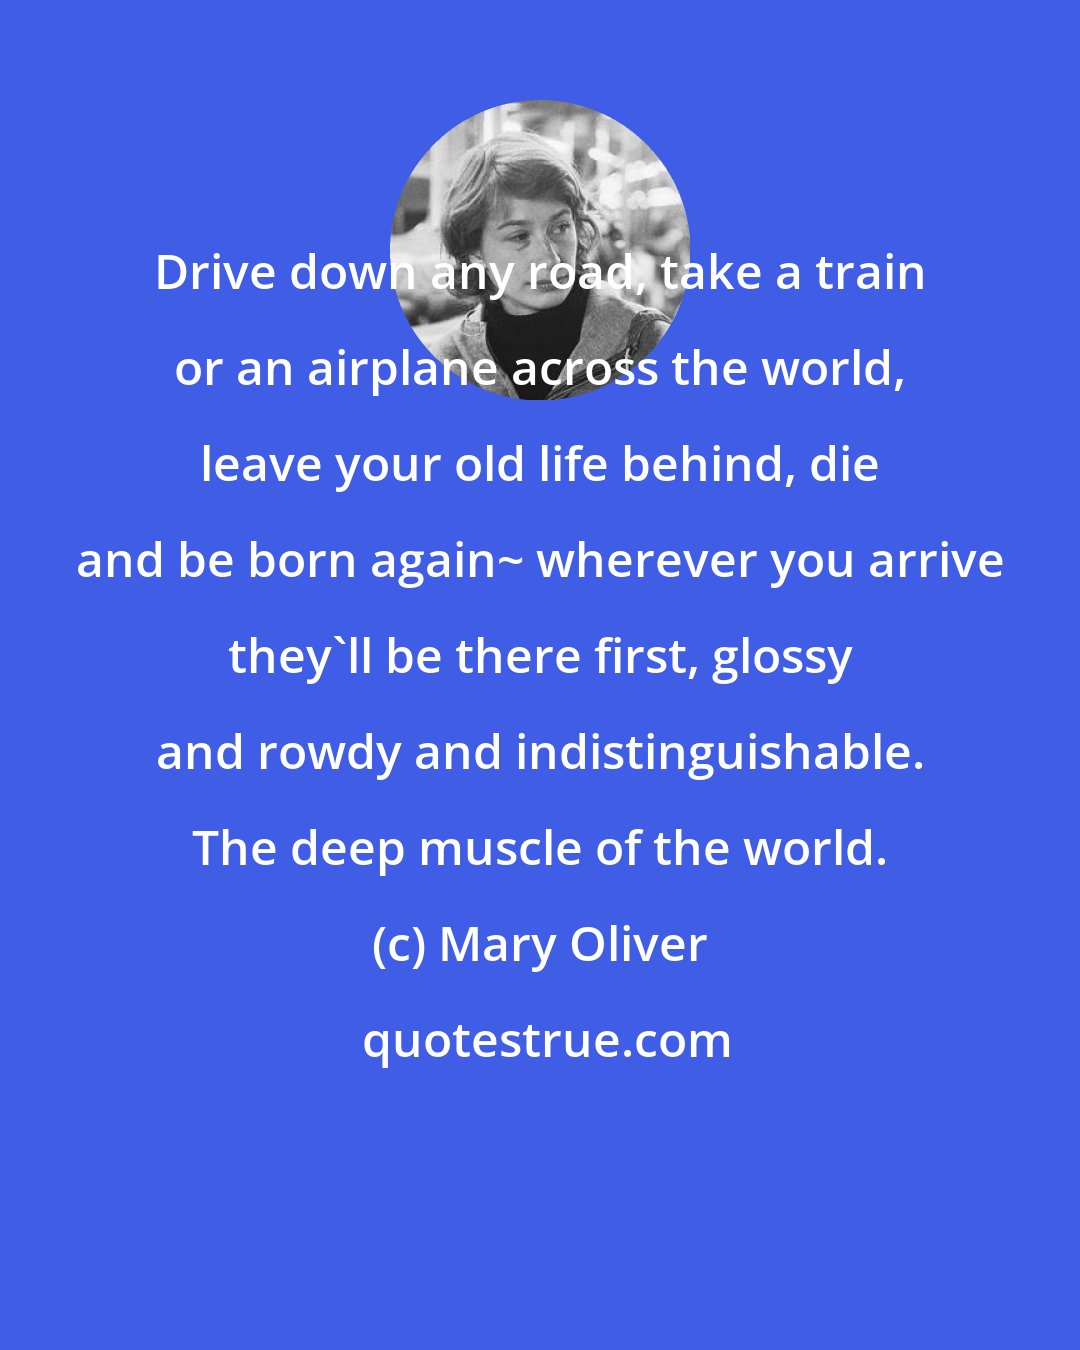 Mary Oliver: Drive down any road, take a train or an airplane across the world, leave your old life behind, die and be born again~ wherever you arrive they'll be there first, glossy and rowdy and indistinguishable. The deep muscle of the world.